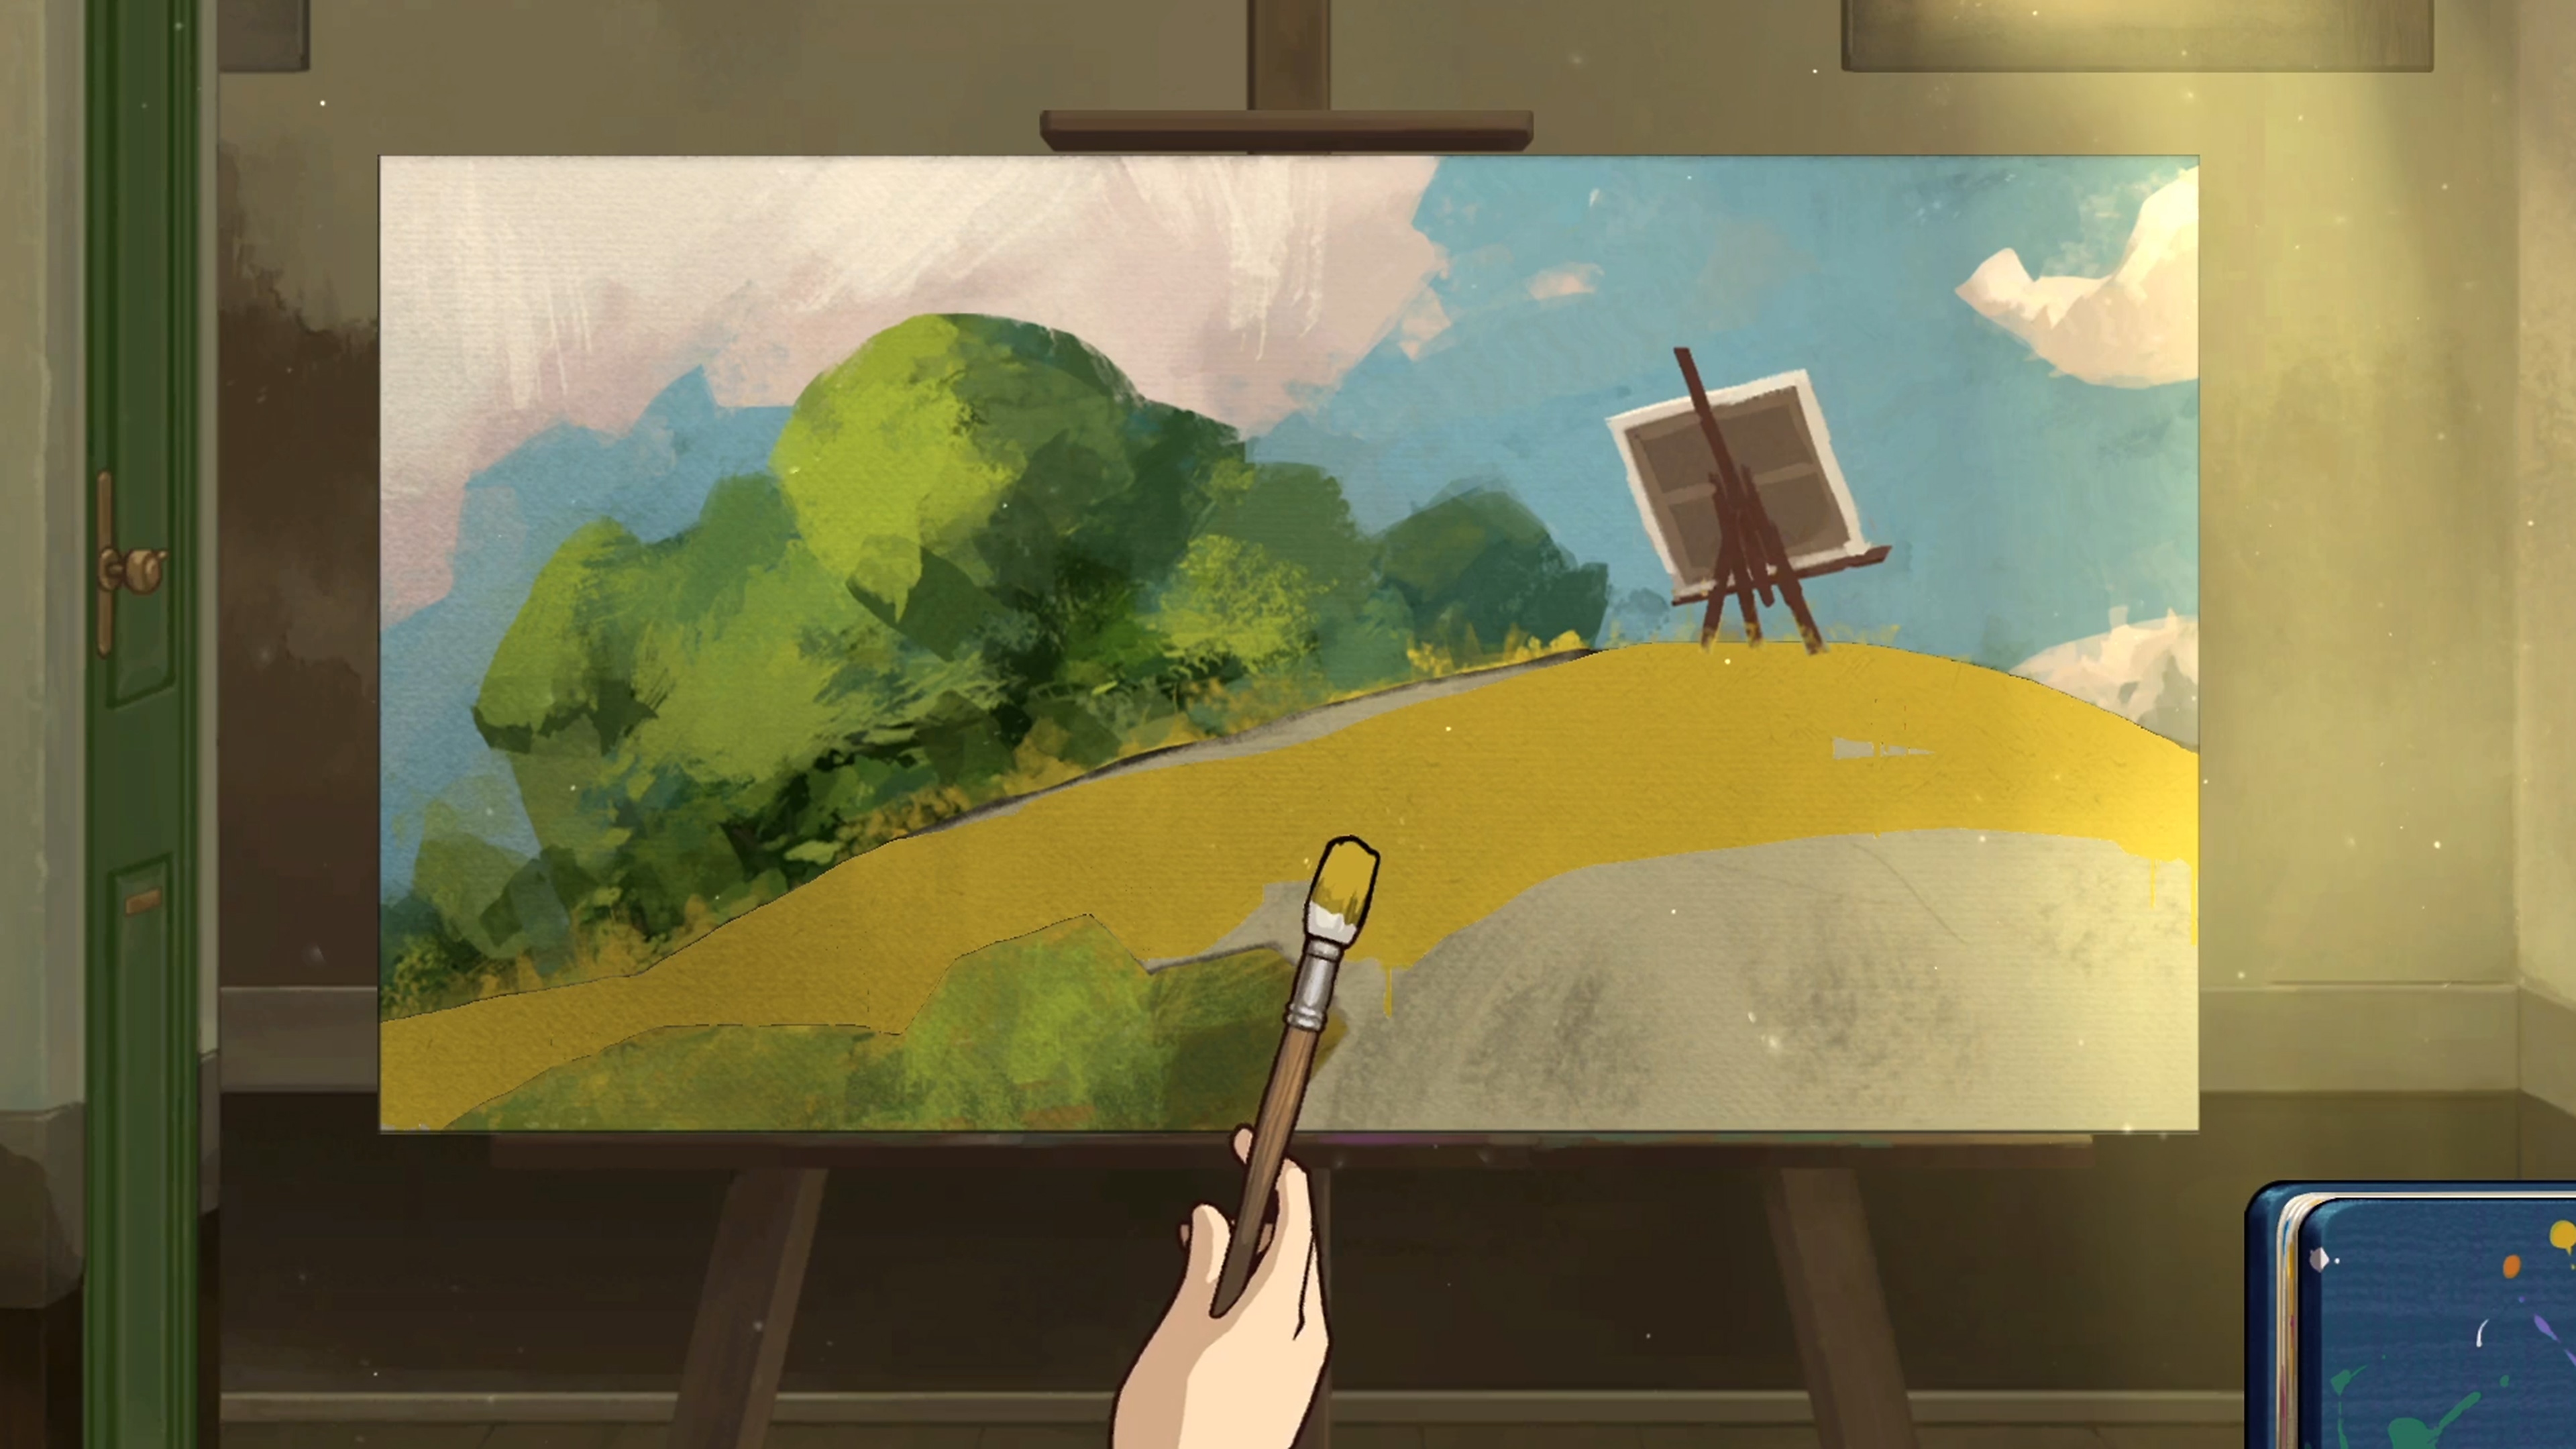 Behind the Frame: The Finest Scenery screenshot showing a painting of a landscape